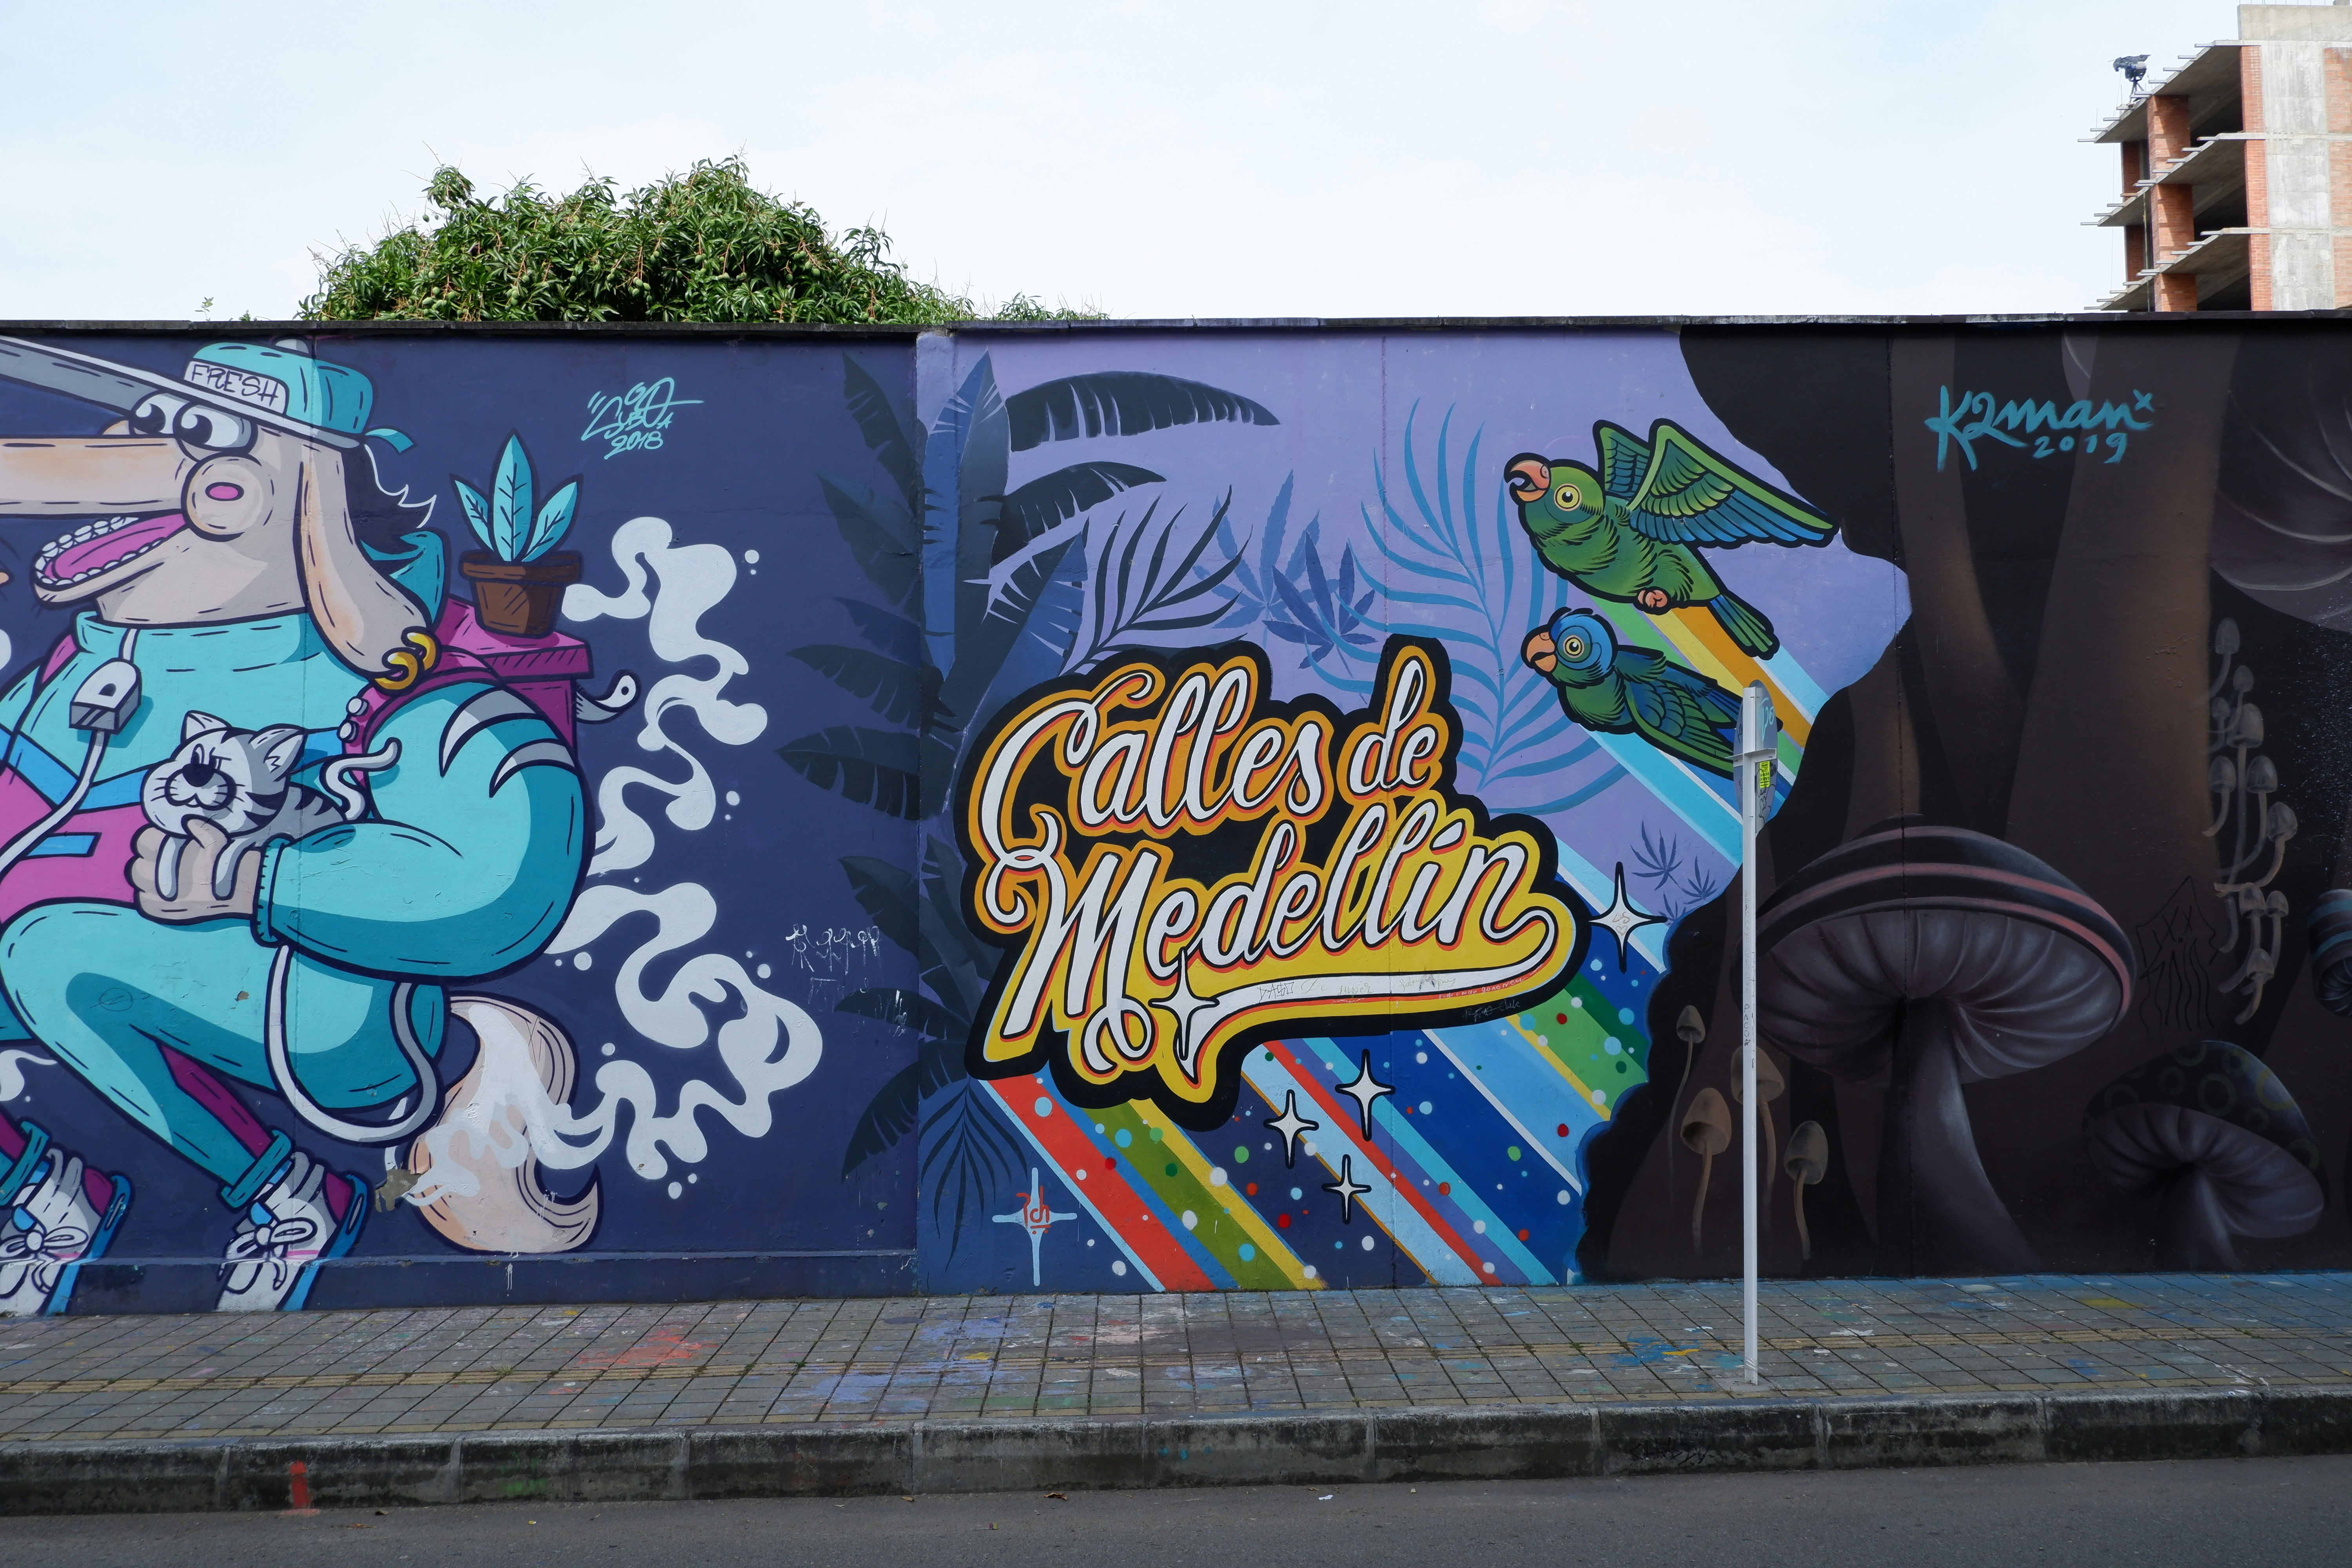 A wall along an El Poblado street is covered in colorful graffiti art  